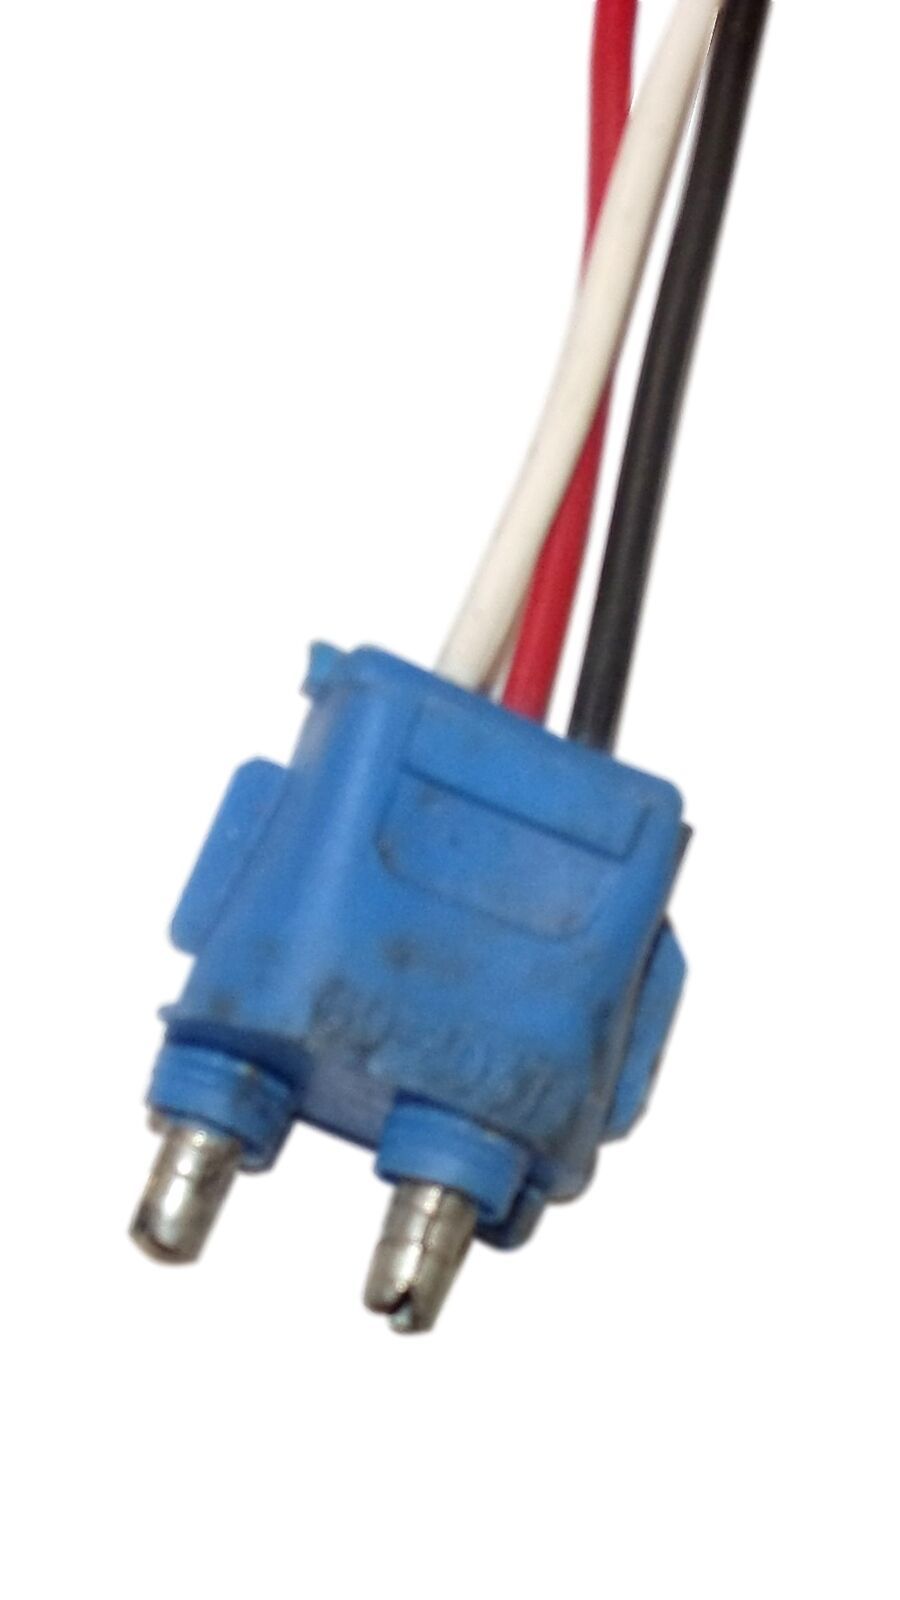 Primary image for Grote 60-2037 Harness Connector Plug Replacement Pig Tail